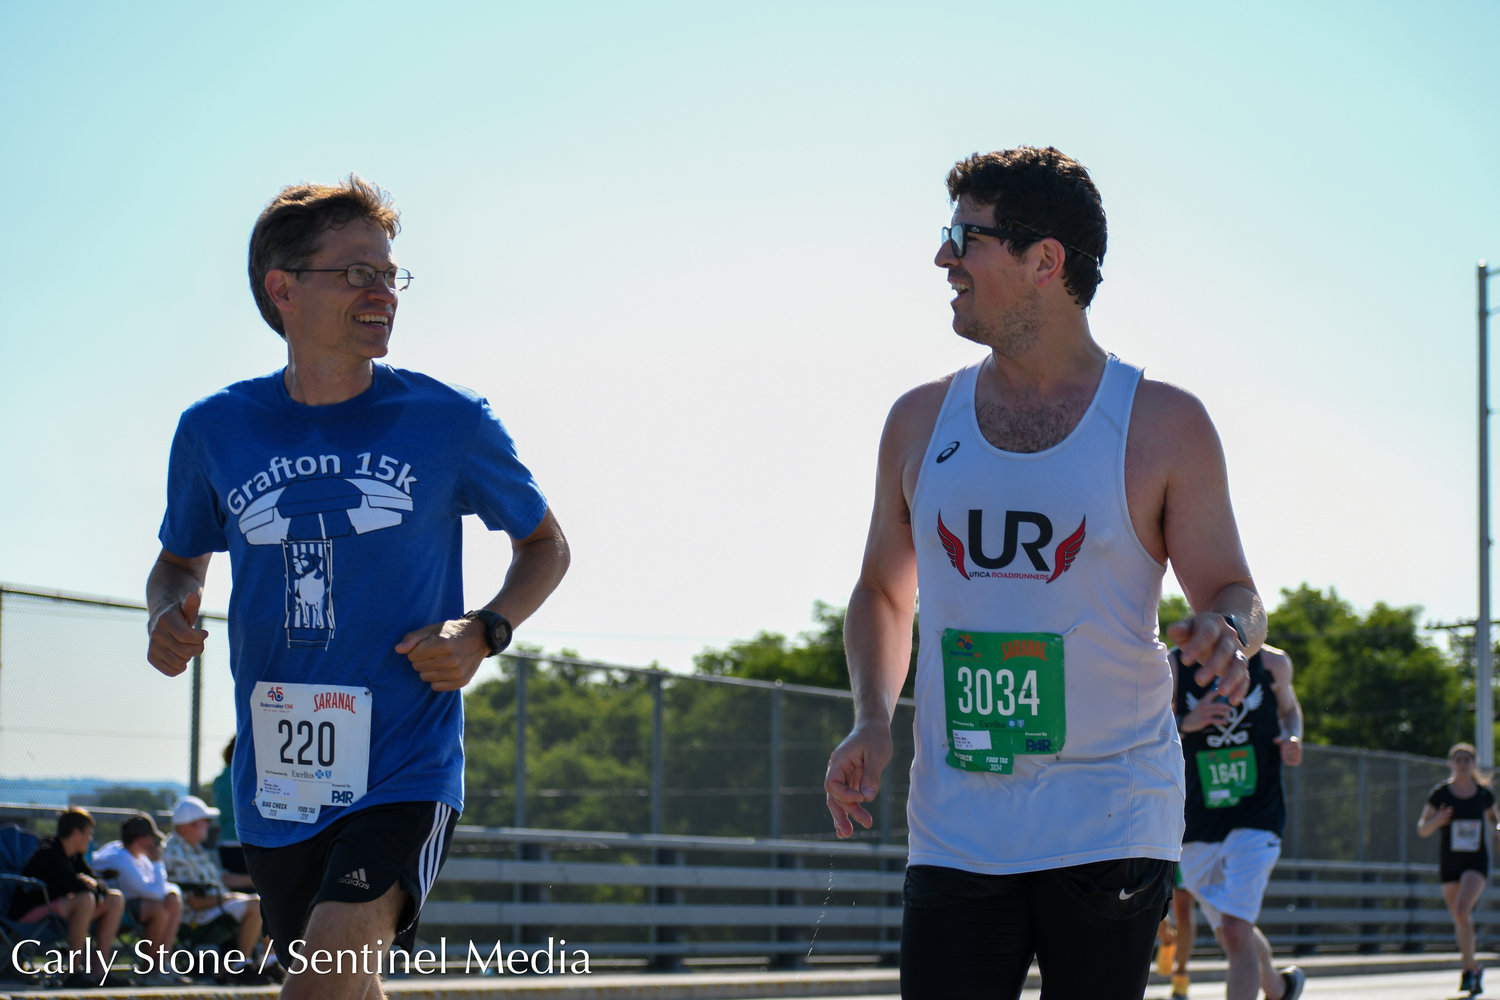 Competitors in the 45th Boilermaker Road Race made their way over Burrstone Road bridge as they approached the finish line over three miles away.